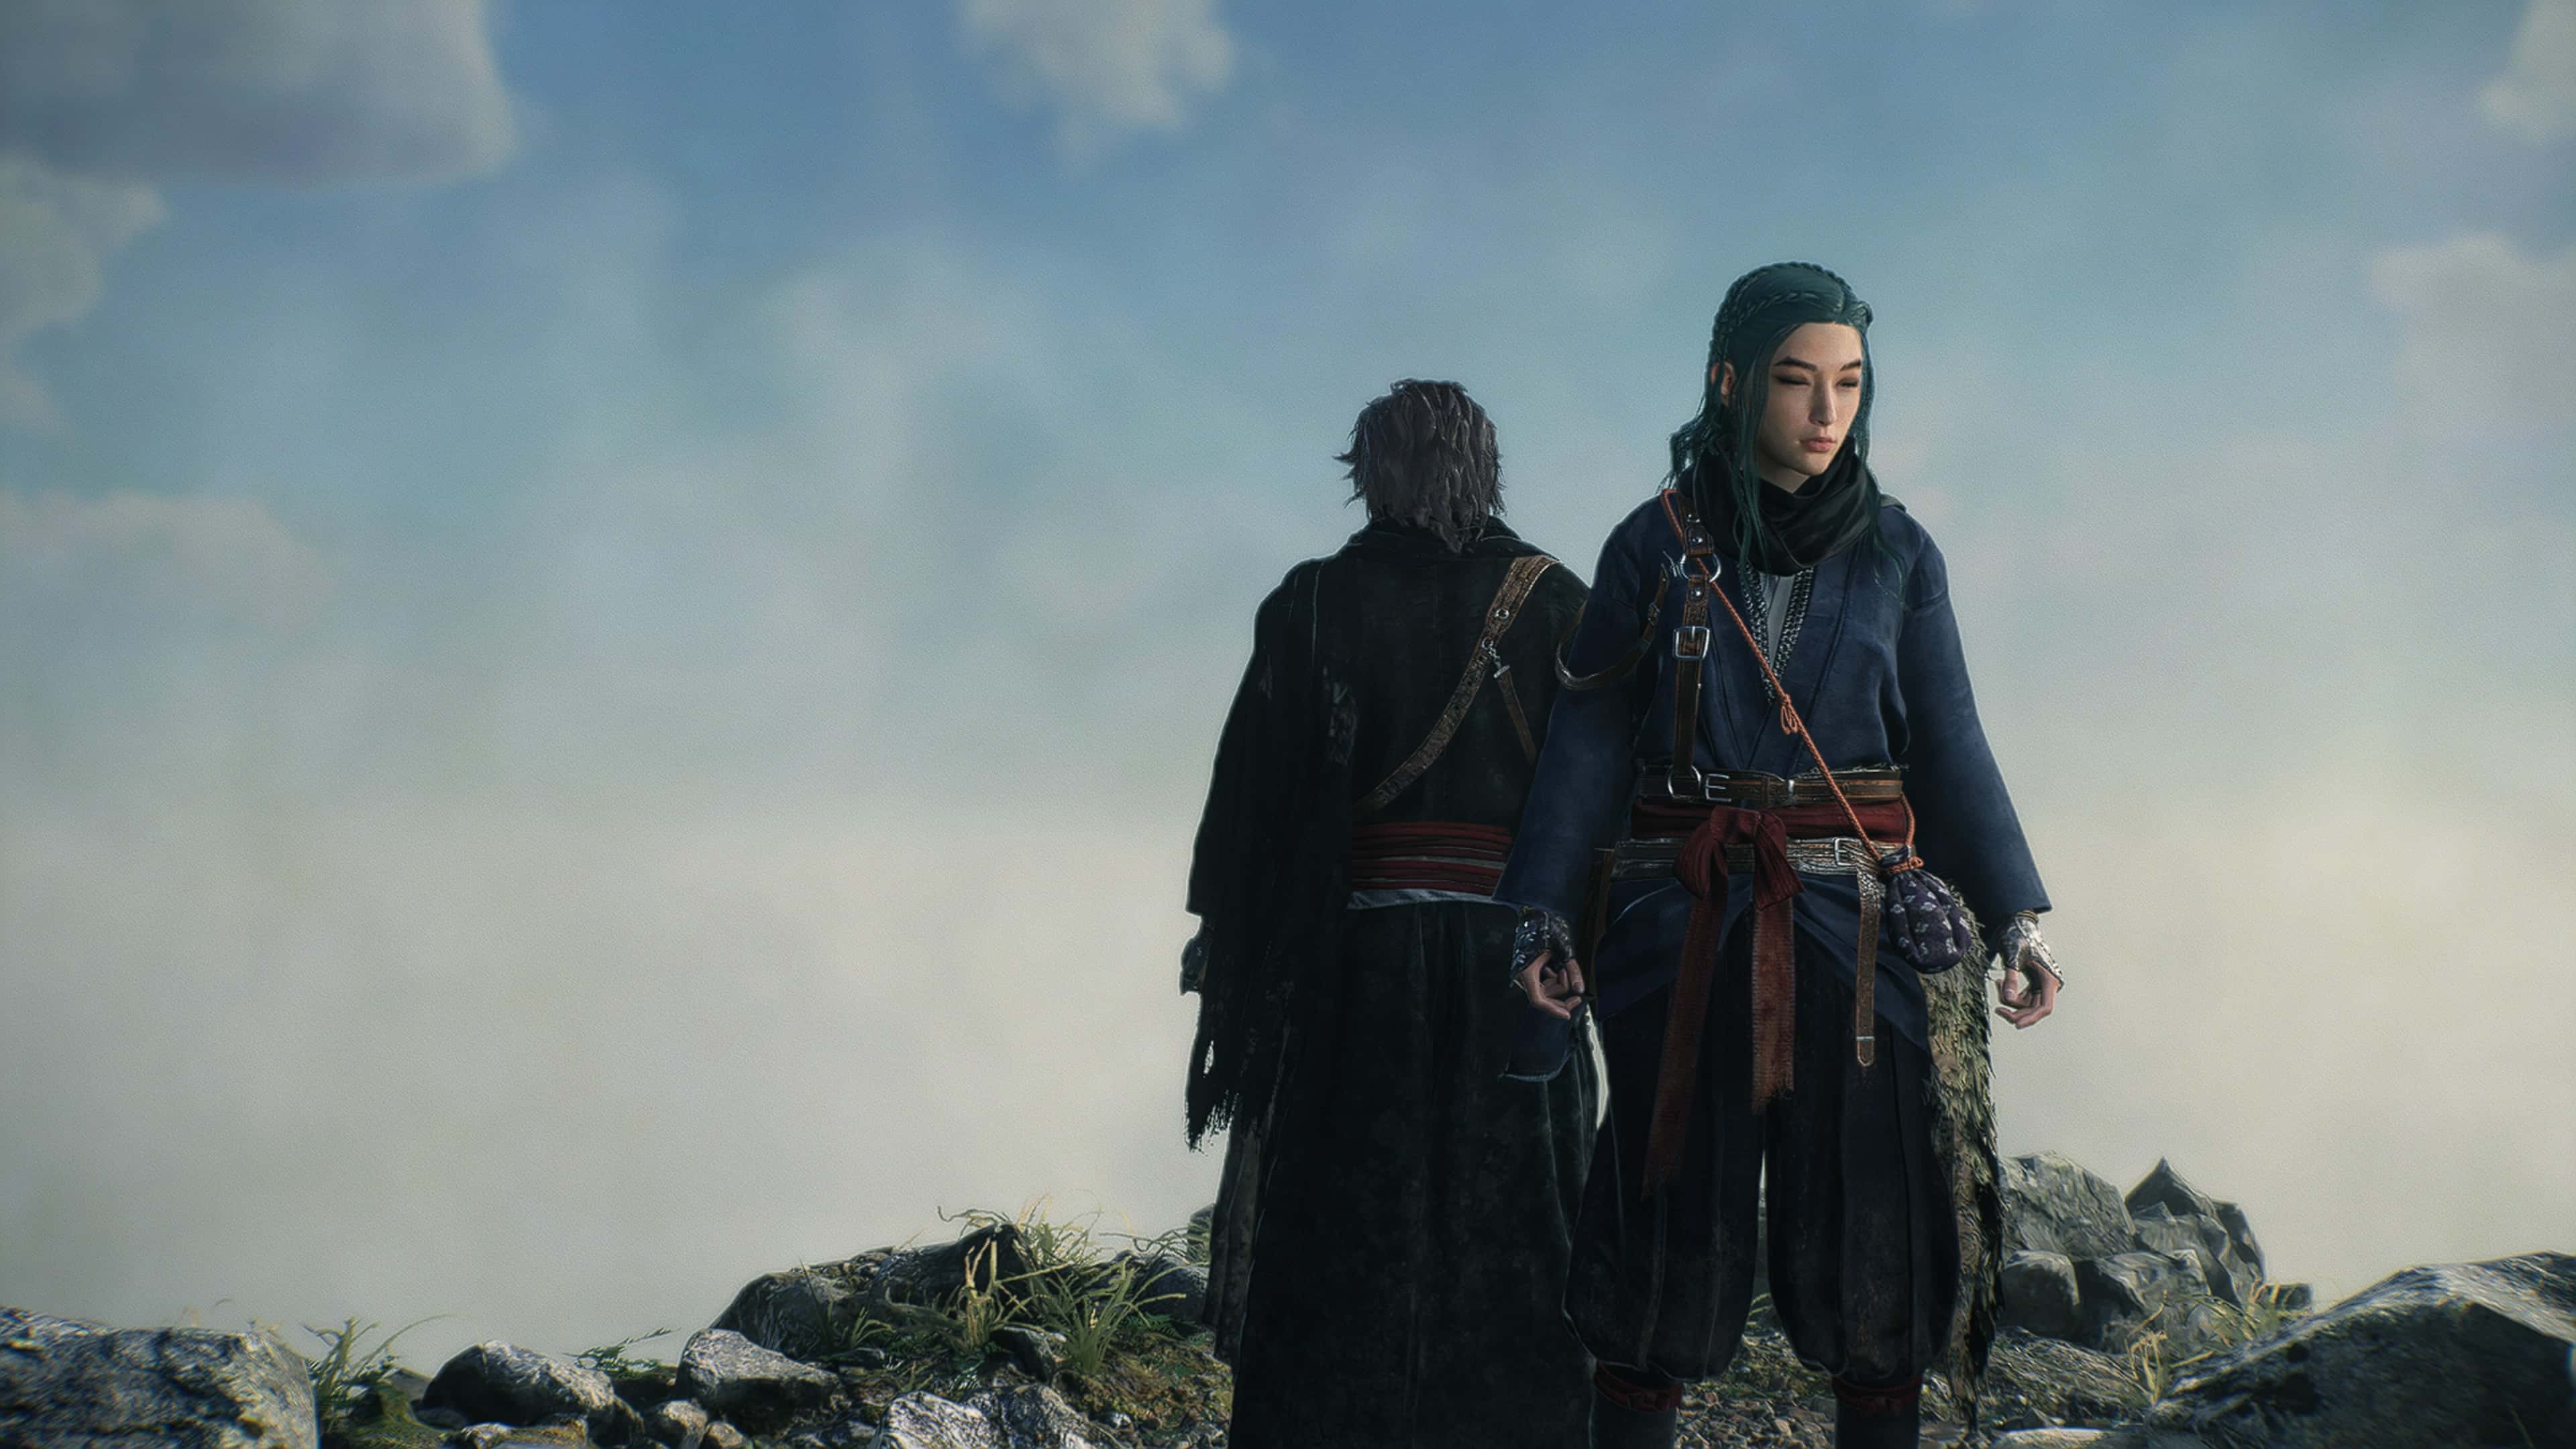 Rise of the Ronin how to change appearance - character creator shows the two characters